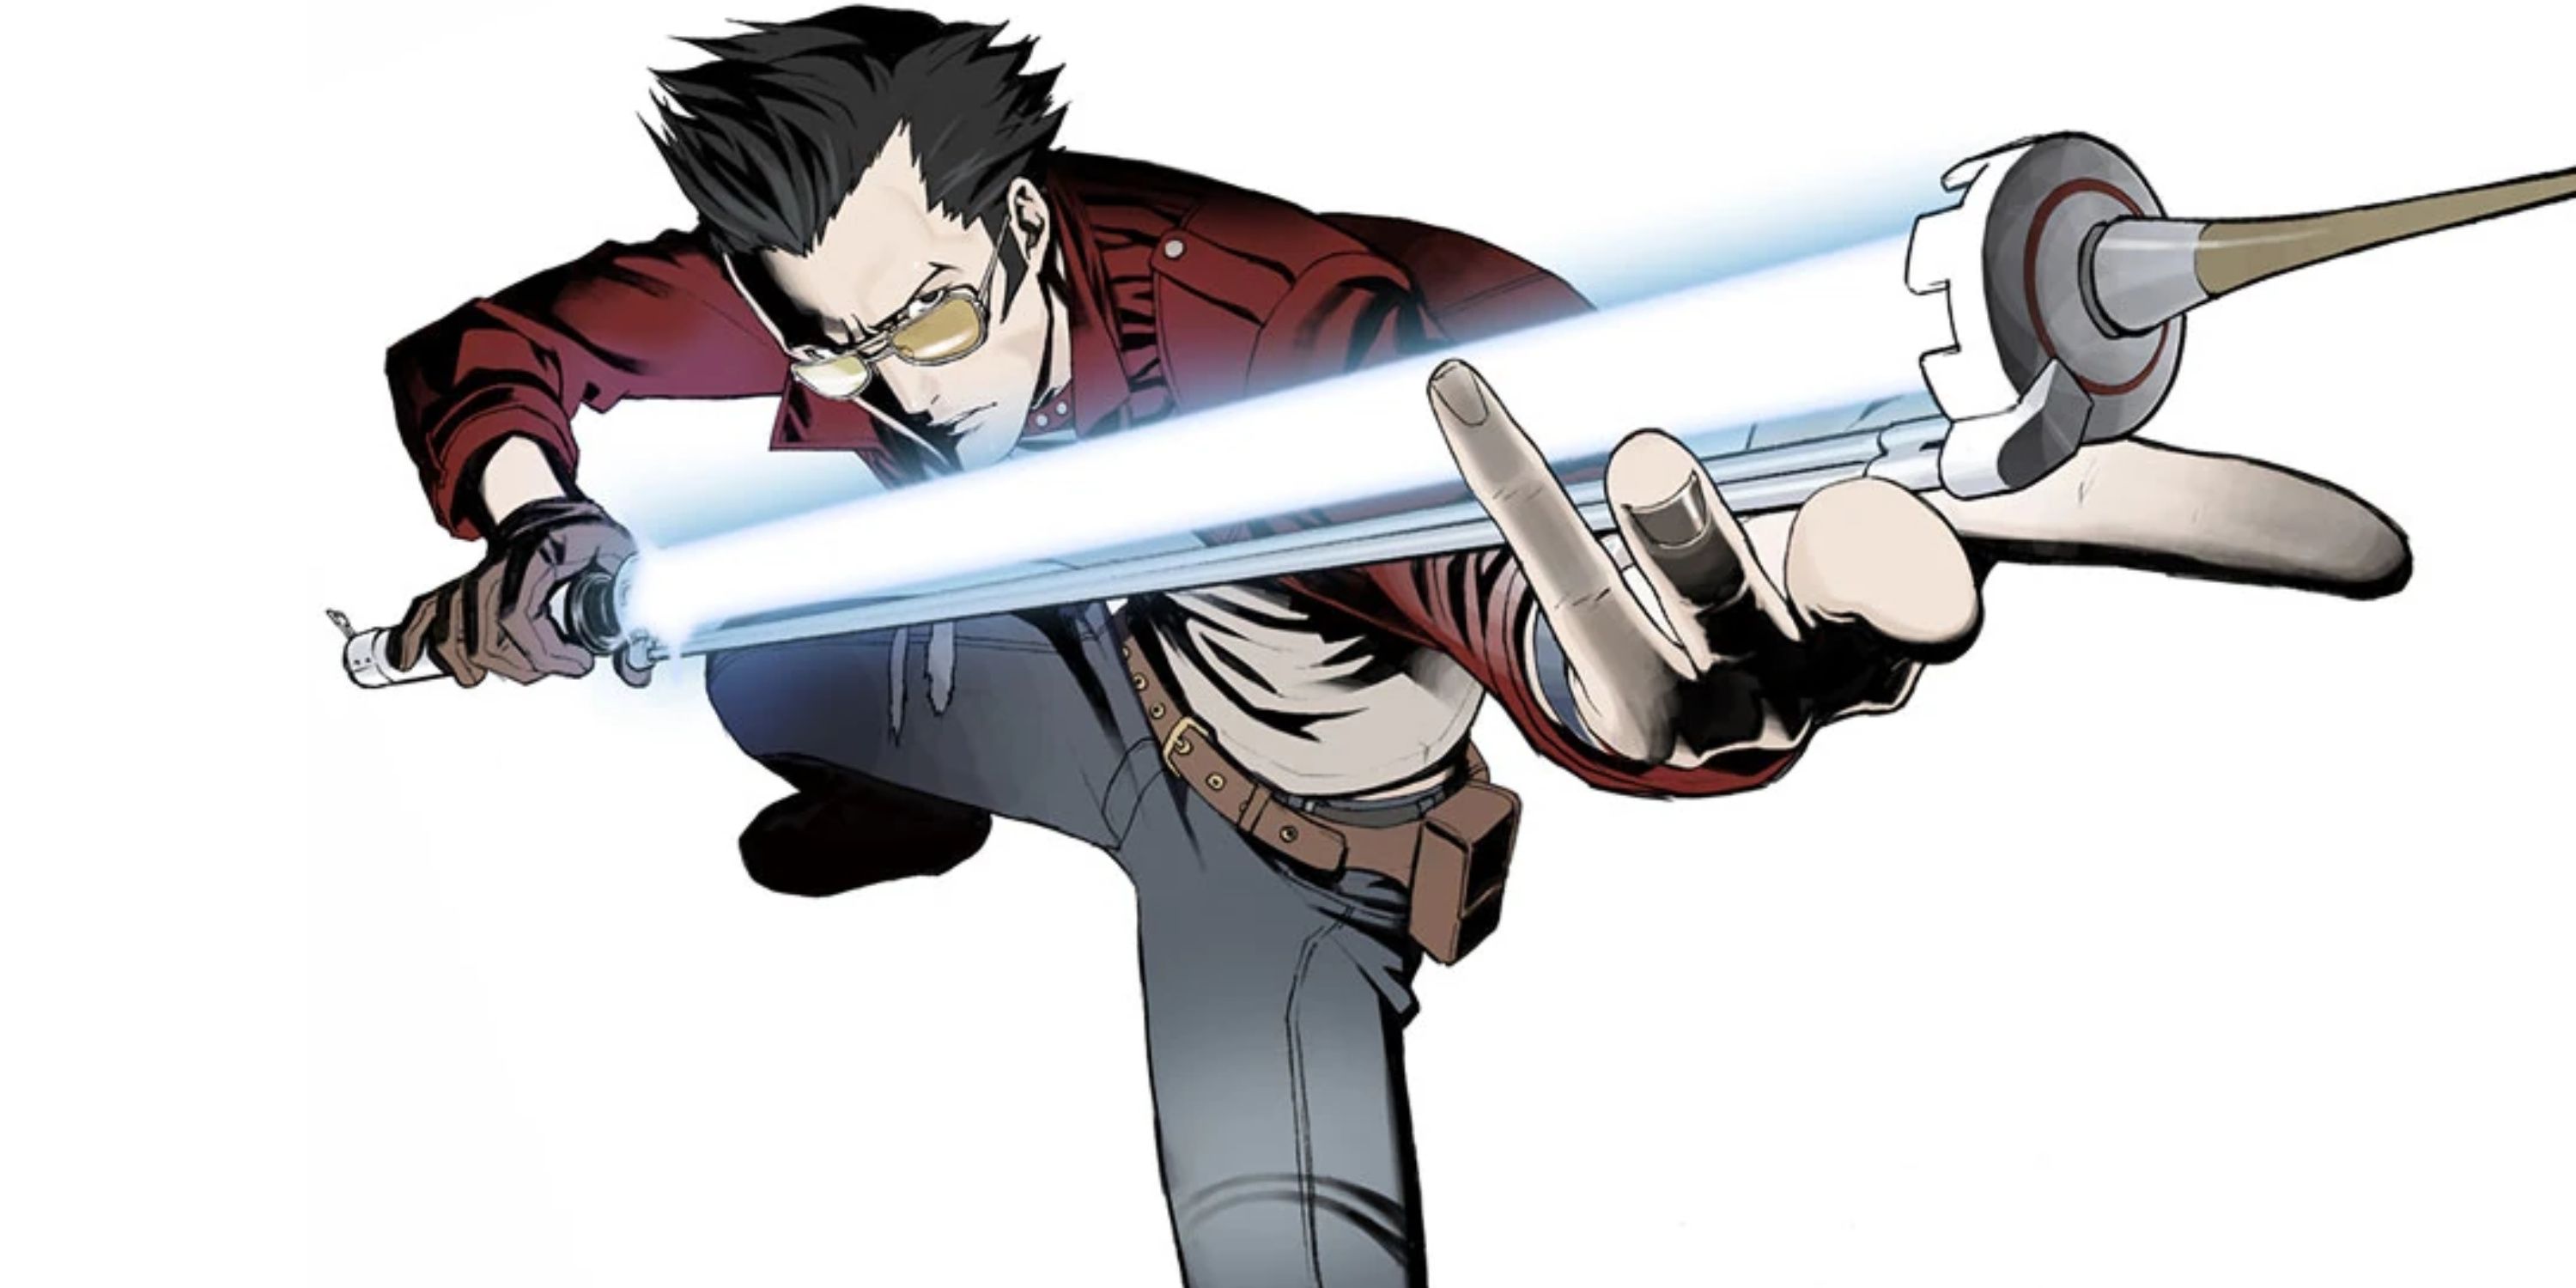 Travis Touchdown from No More Heroes with his Beam Katana